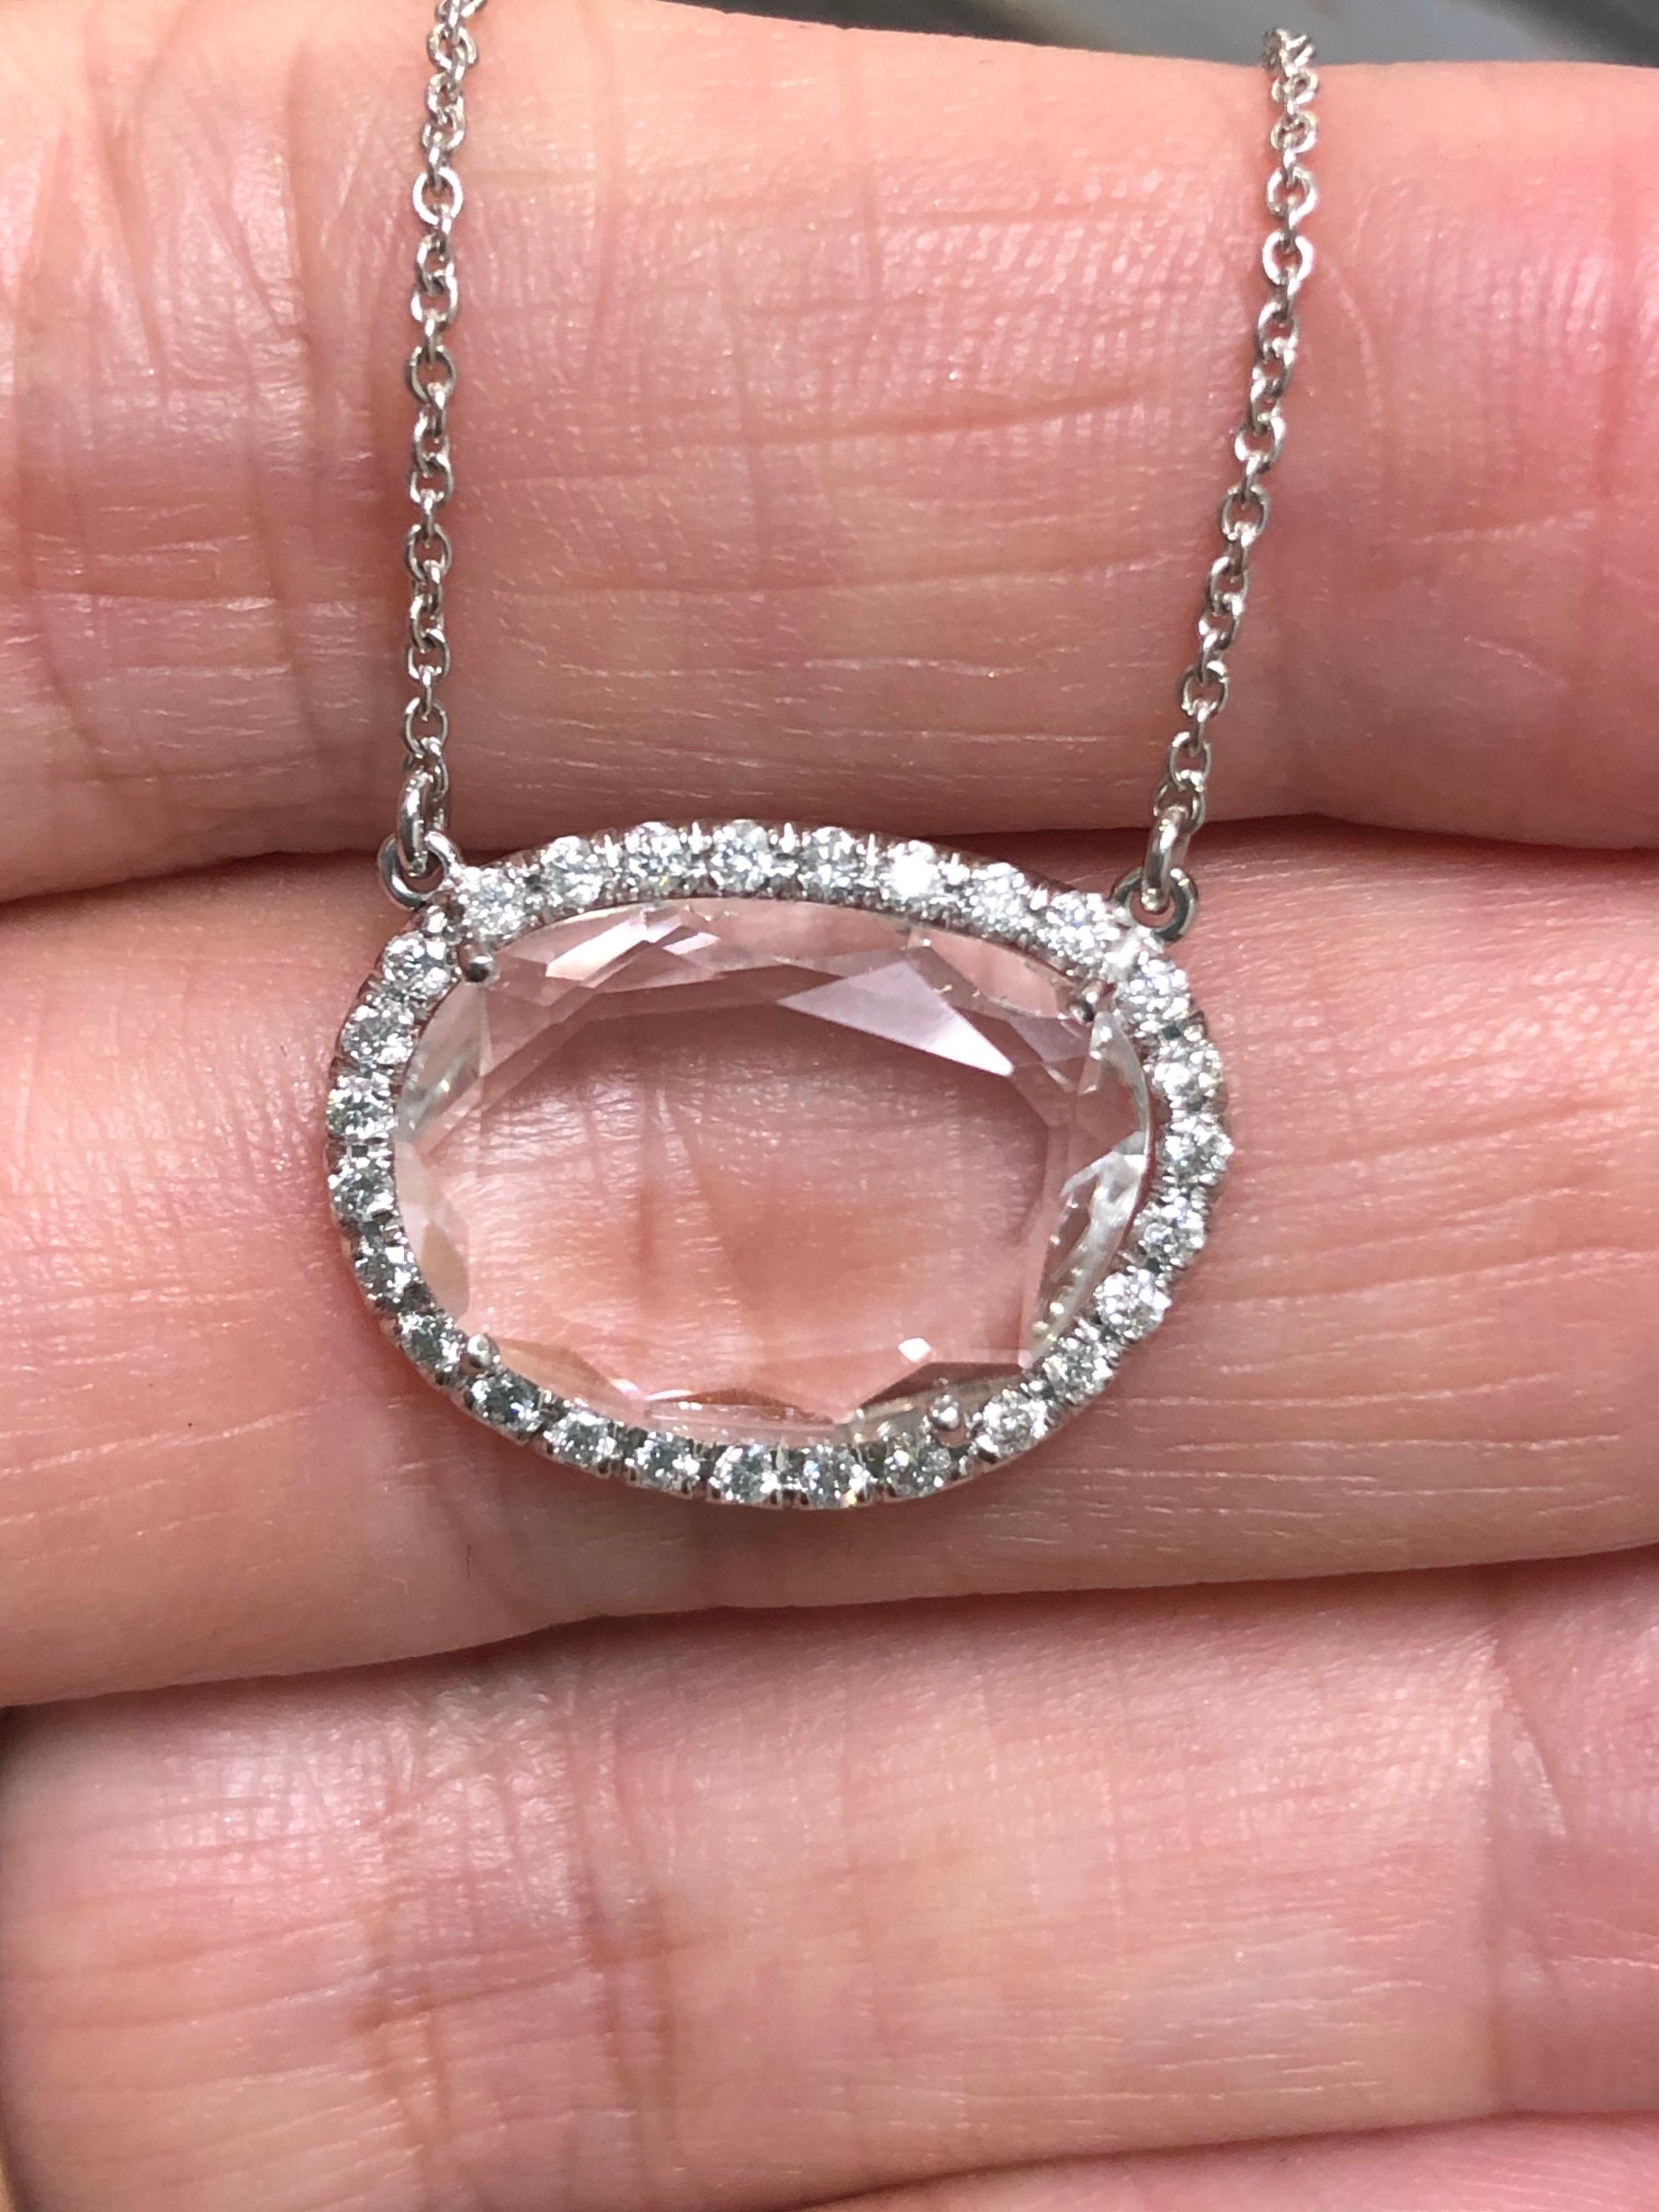 4.04 Carat Cobblestone Cut White Quartz with 27 Pave Set Diamonds Halo Pendant

This beautiful and graceful necklace is a one of a kind, handmade creation by H&H Jewels.  
It is a halo made of 27 pave set diamonds with a total weight of 0.30 carats,